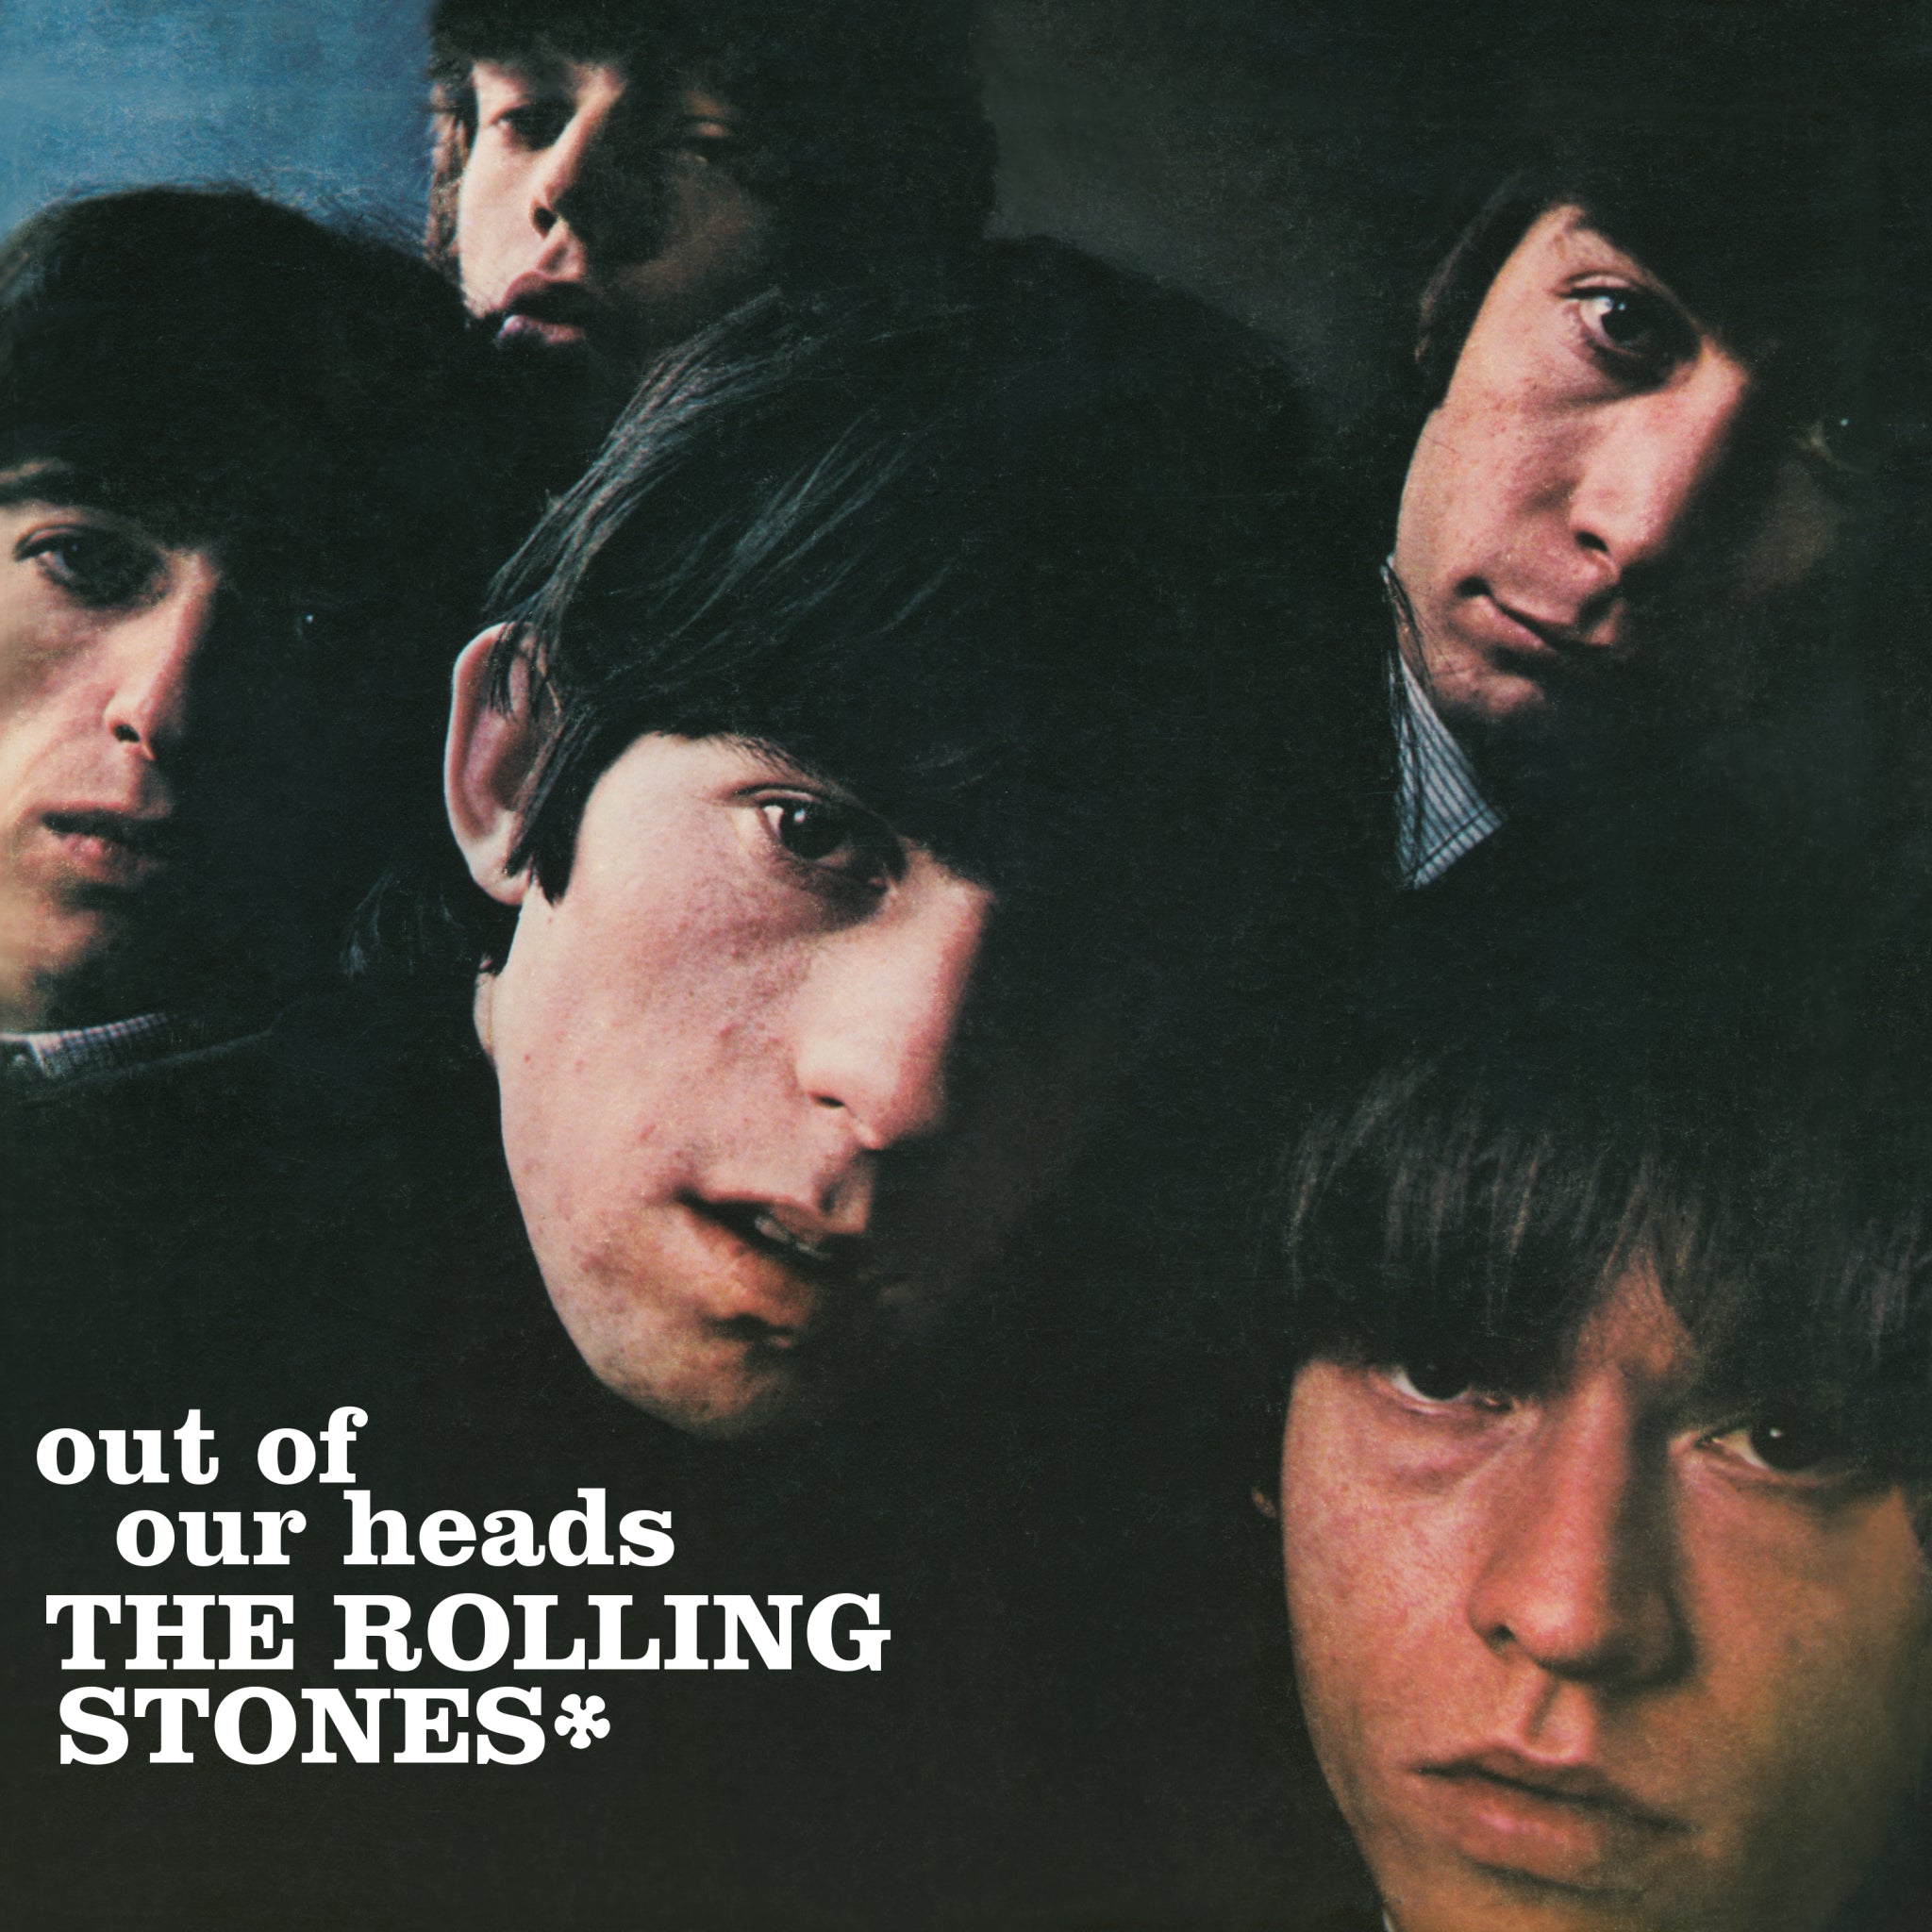 The Rolling Stones - Out of Our Heads (US Edition): Vinyl LP